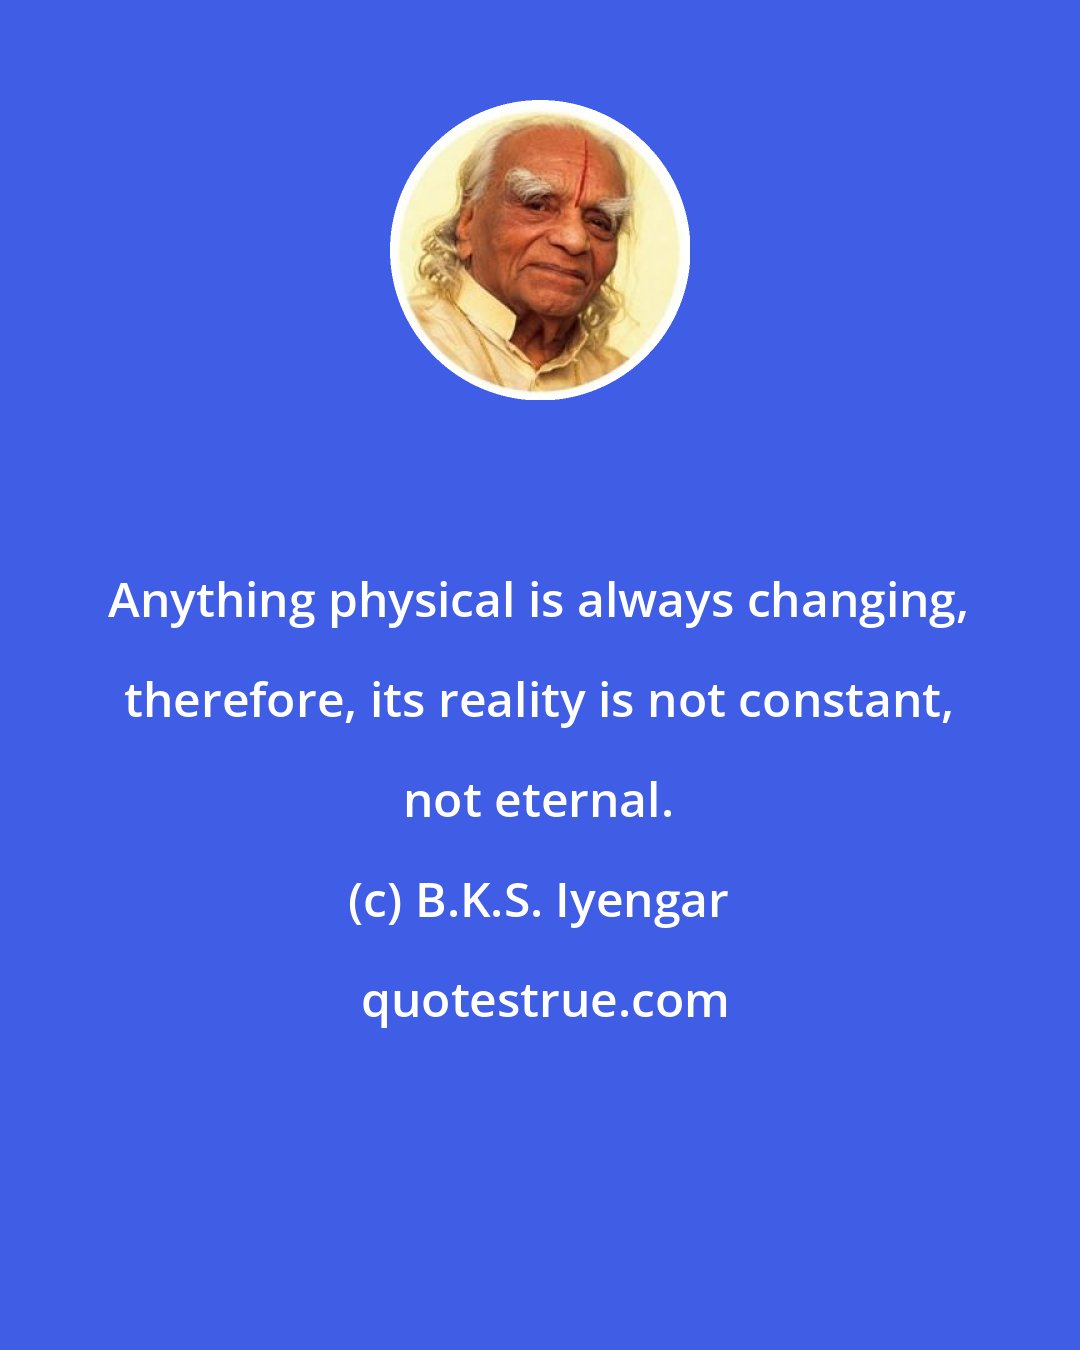 B.K.S. Iyengar: Anything physical is always changing, therefore, its reality is not constant, not eternal.